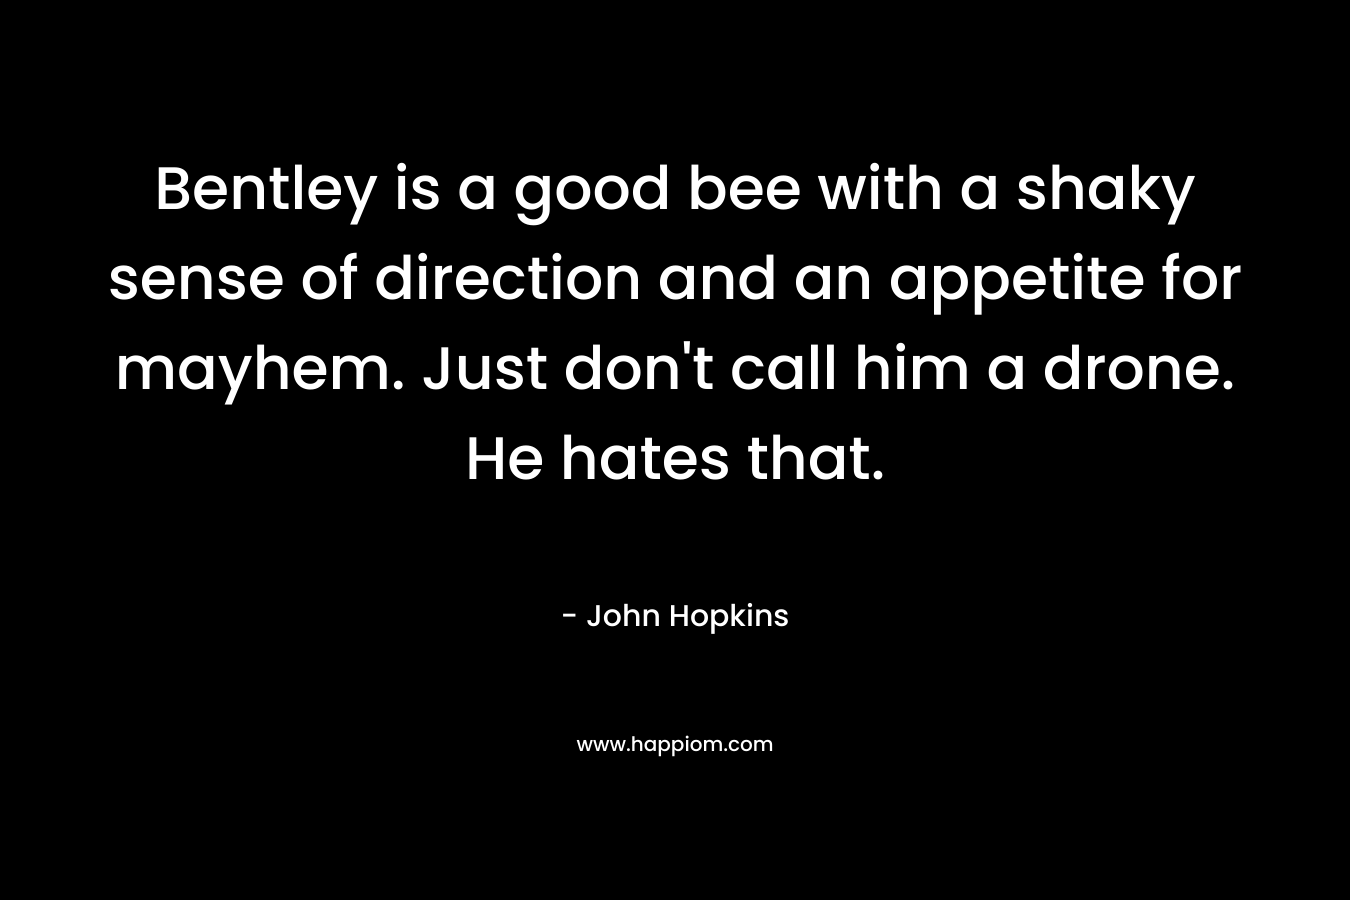 Bentley is a good bee with a shaky sense of direction and an appetite for mayhem. Just don’t call him a drone. He hates that. – John    Hopkins